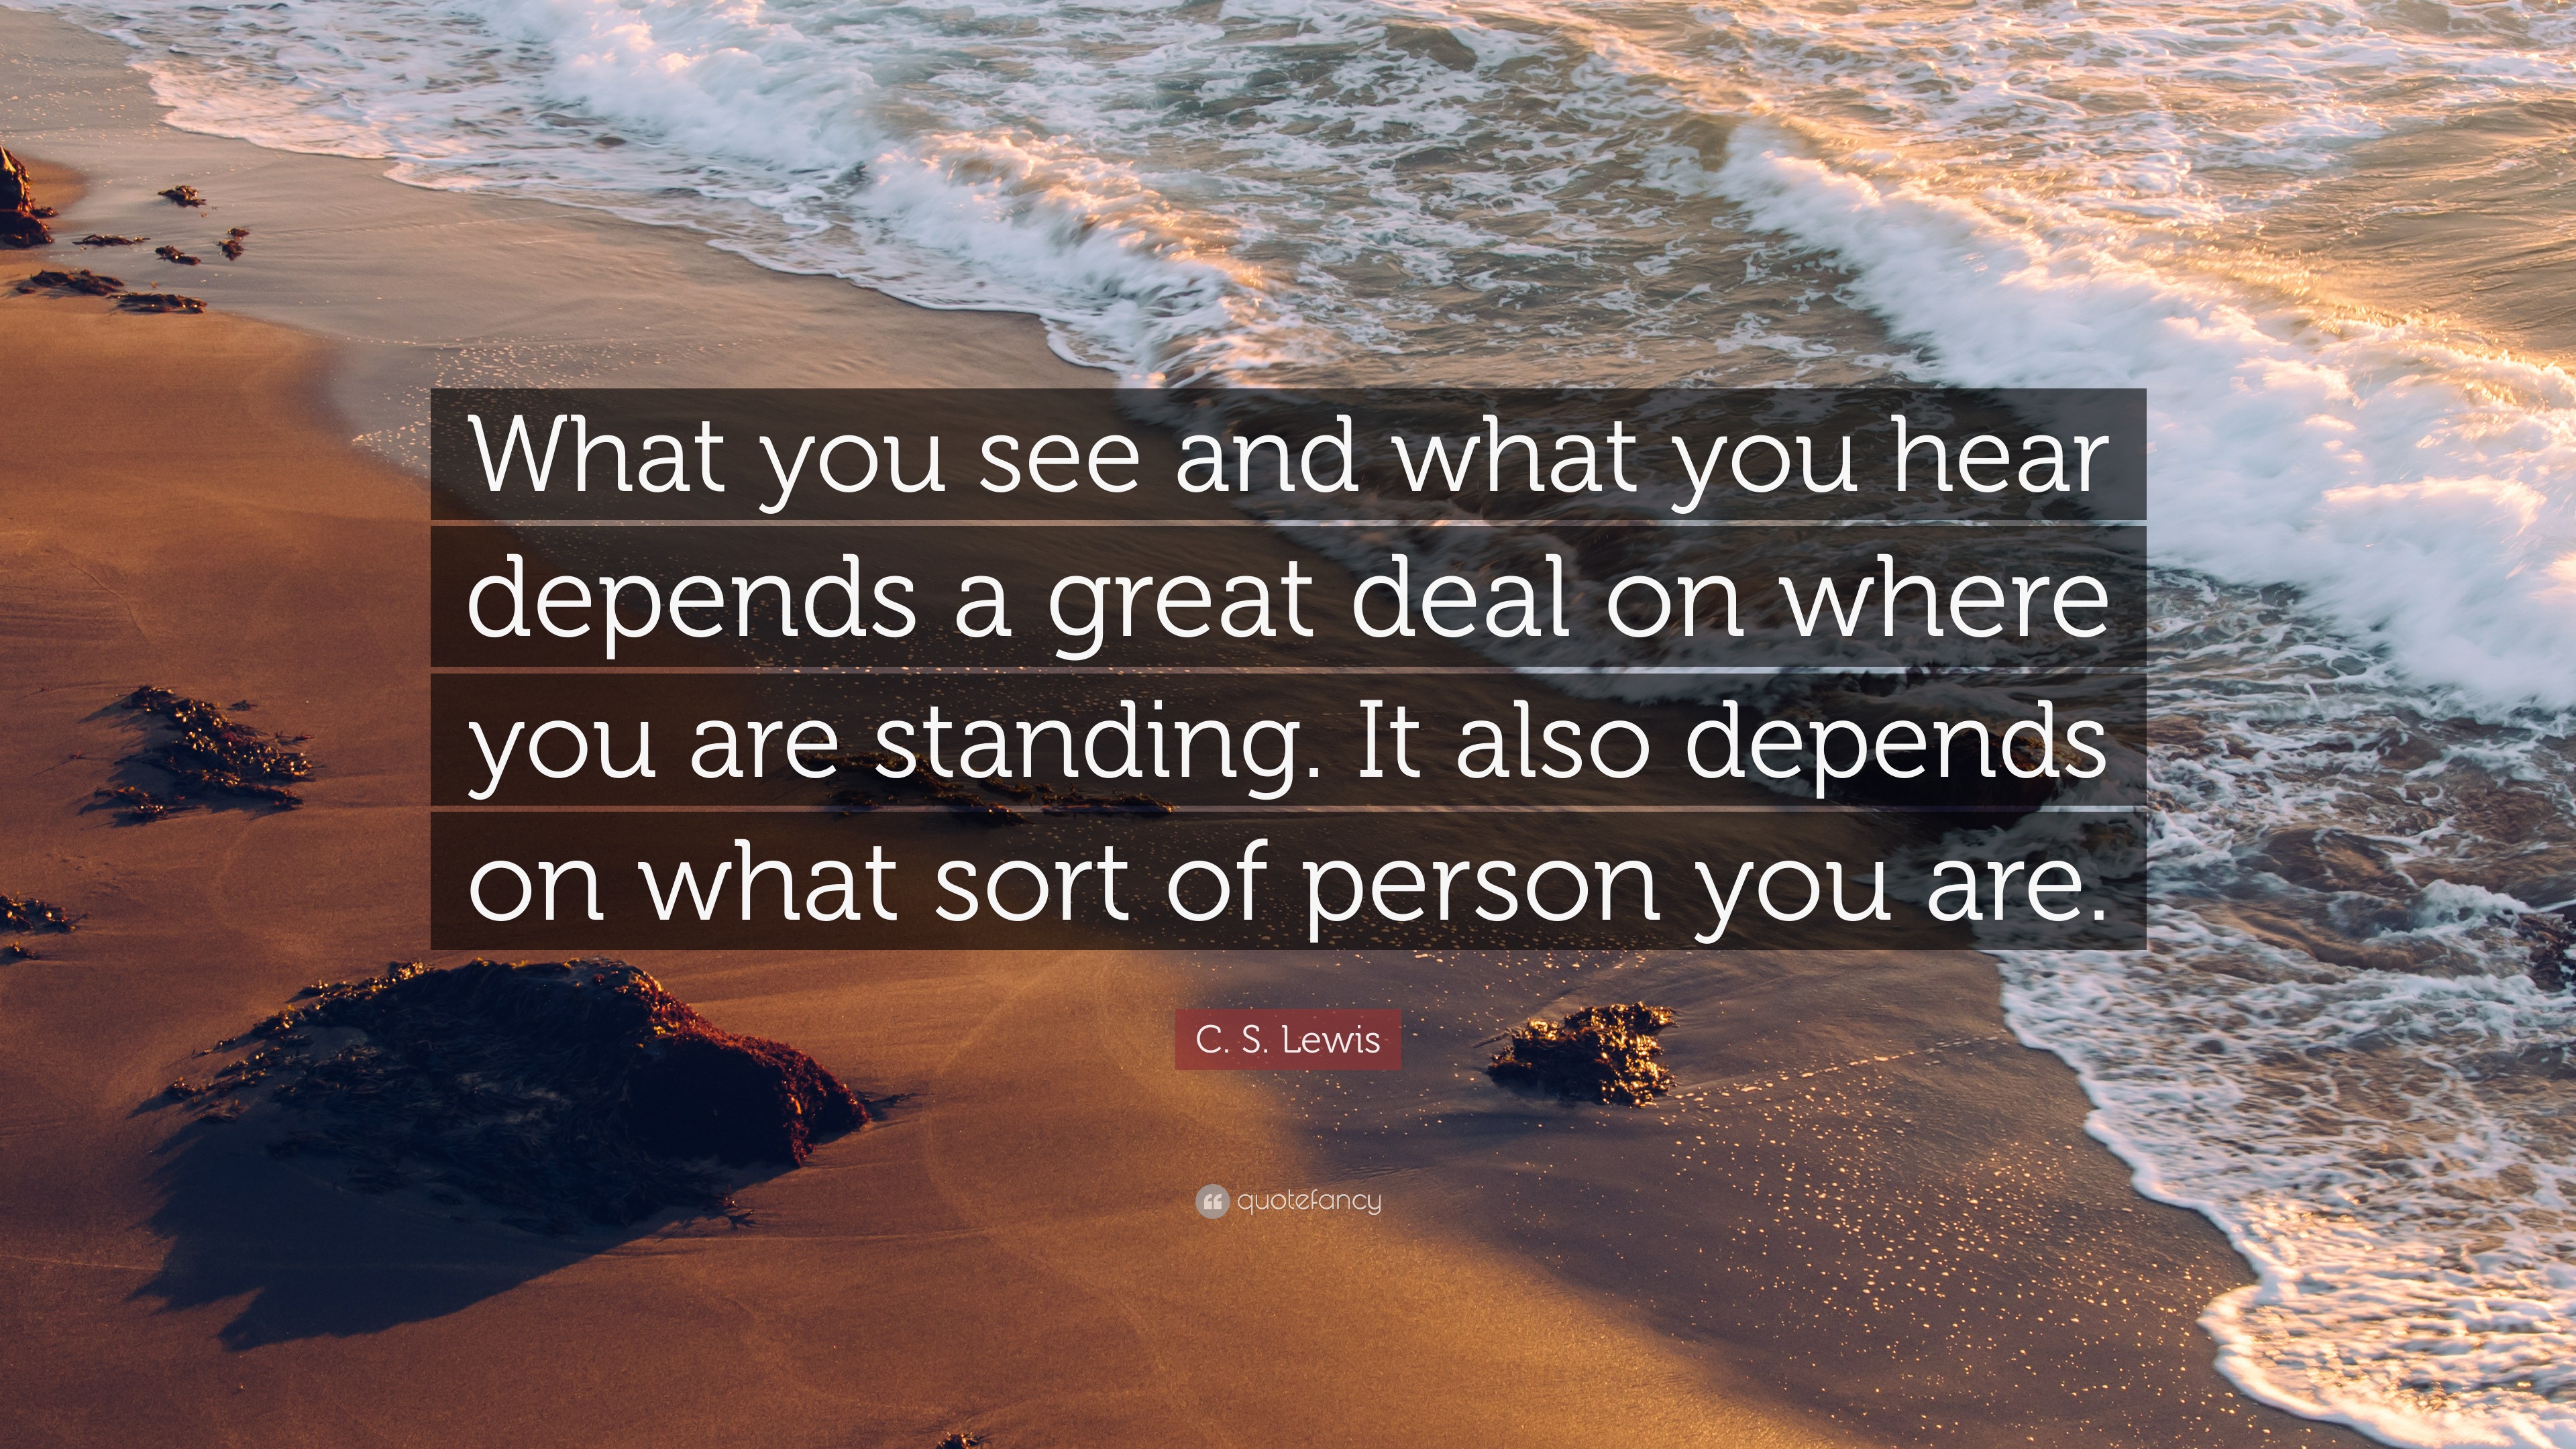 C S Lewis Quote “what You See And What You Hear Depends A Great Deal